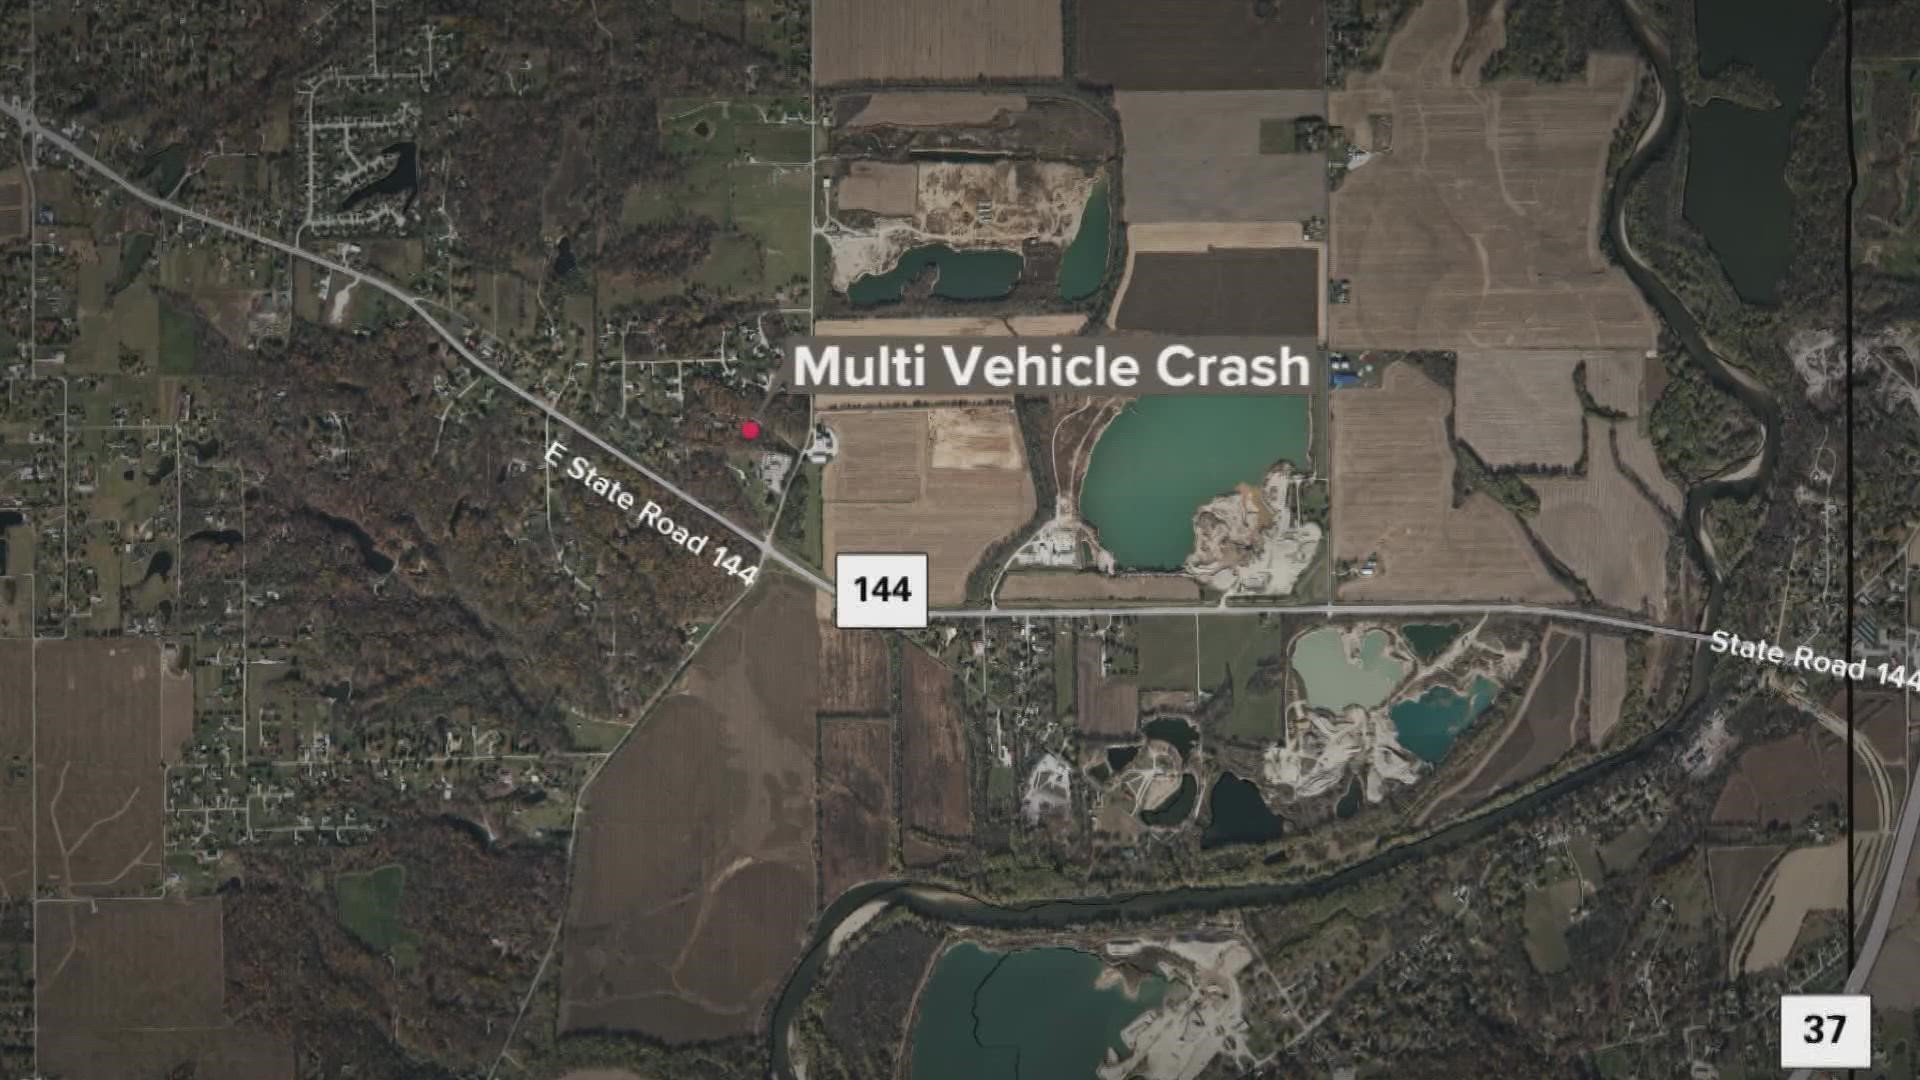 It happened around 3 p.m. Friday. The Mooresville Metropolitan Police Department said the crash involved 10 cars.